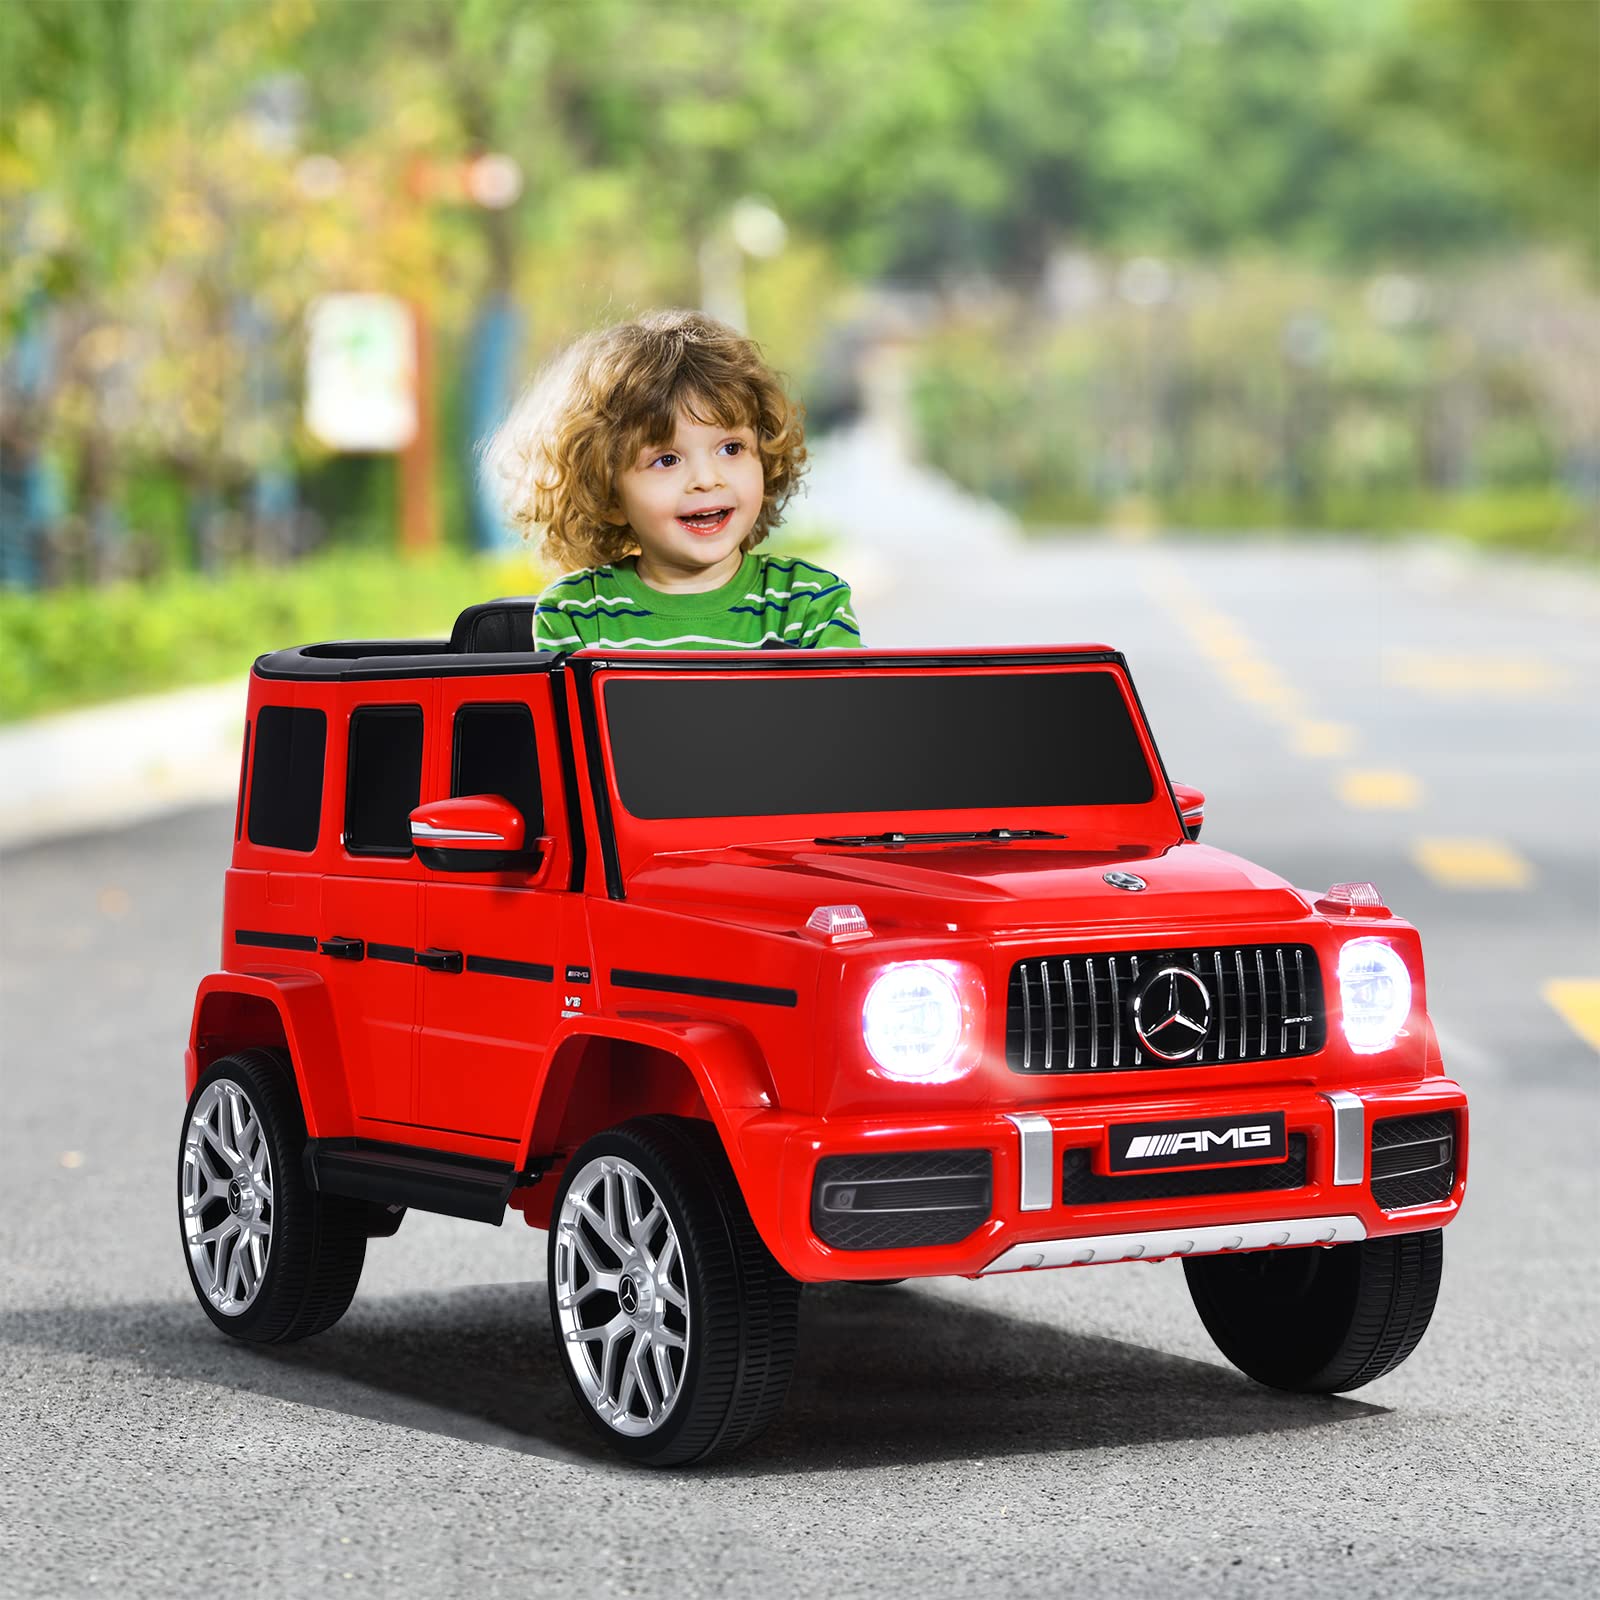 OLAKIDS 12V Kids Ride On Car, Licensed Mercedes Benz G63 Electric Vehicle with Remote Control, Double Open Doors, Music, Bluetooth, 2 Speeds, Wheels Suspension, Battery Powered Driving Toy OLAKIDS